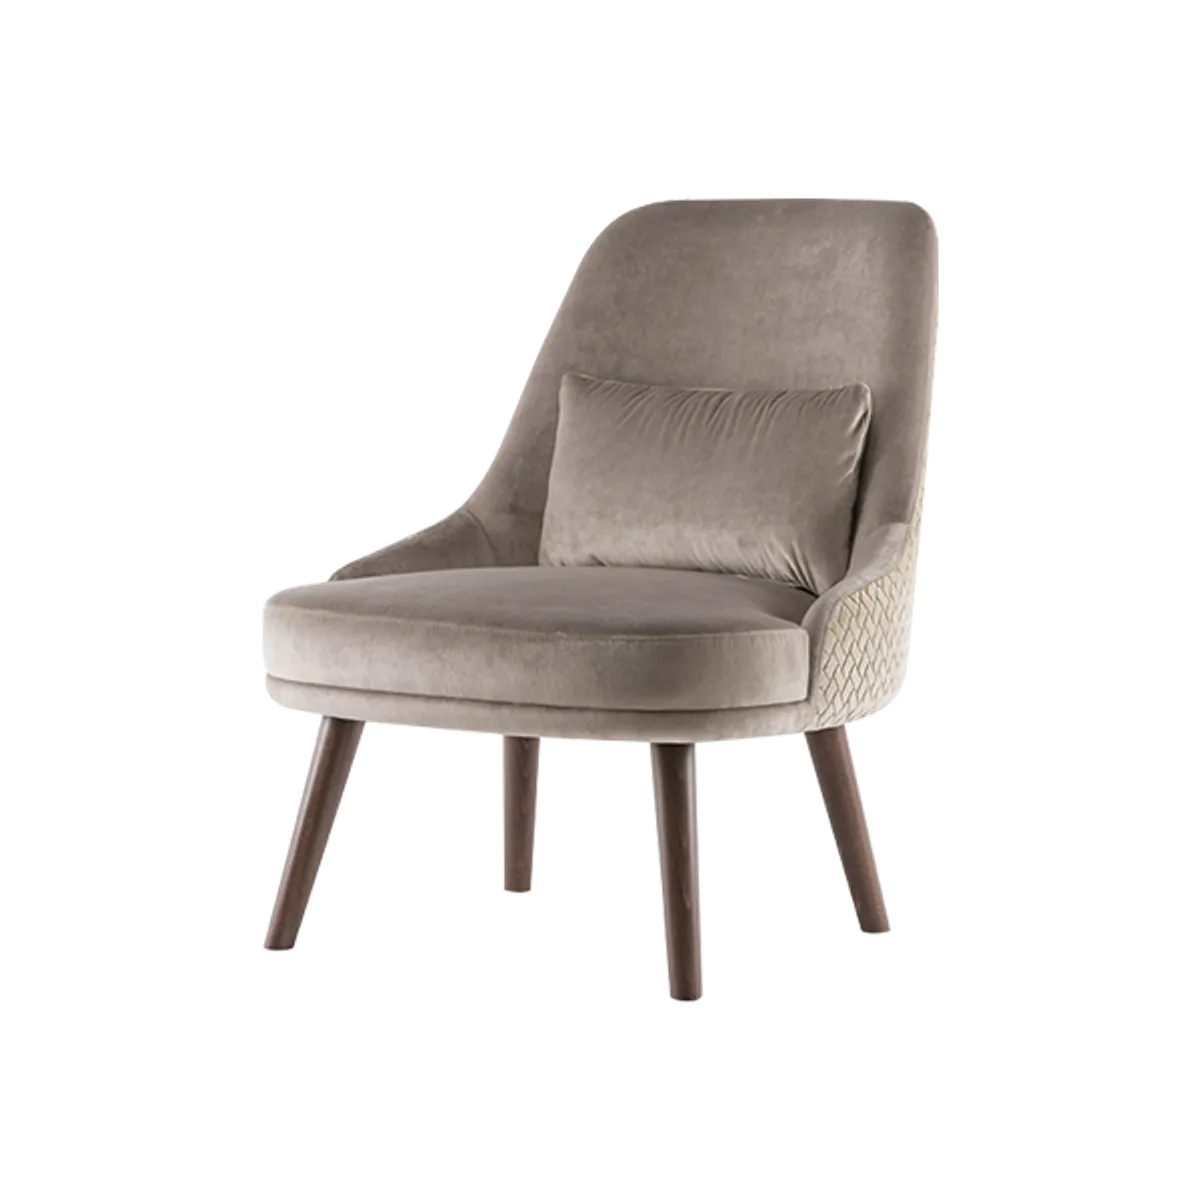 Web Nandie Lounge Chair Healthcare Furniture Nude Upholstery And Wooden Legs Insideoutcontracts